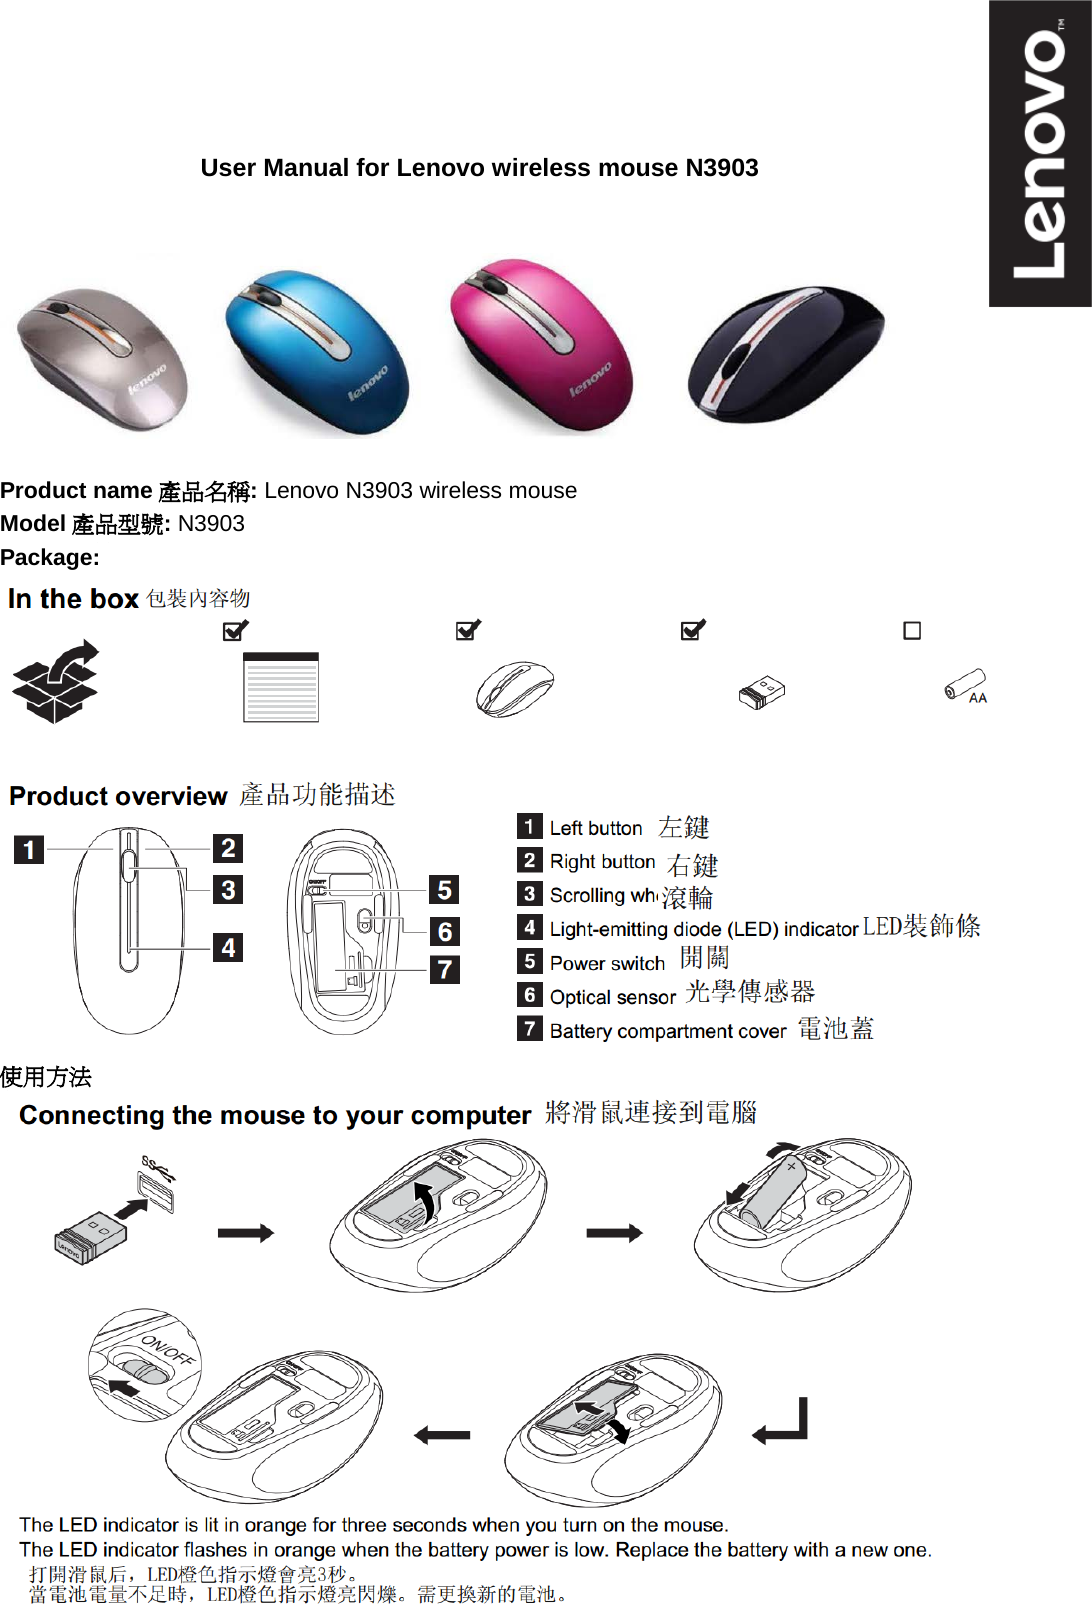  User Manual for Lenovo wireless mouse N3903      Product name產品名稱: Lenovo N3903 wireless mouse Model產品型號: N3903 Package:    使用方法   